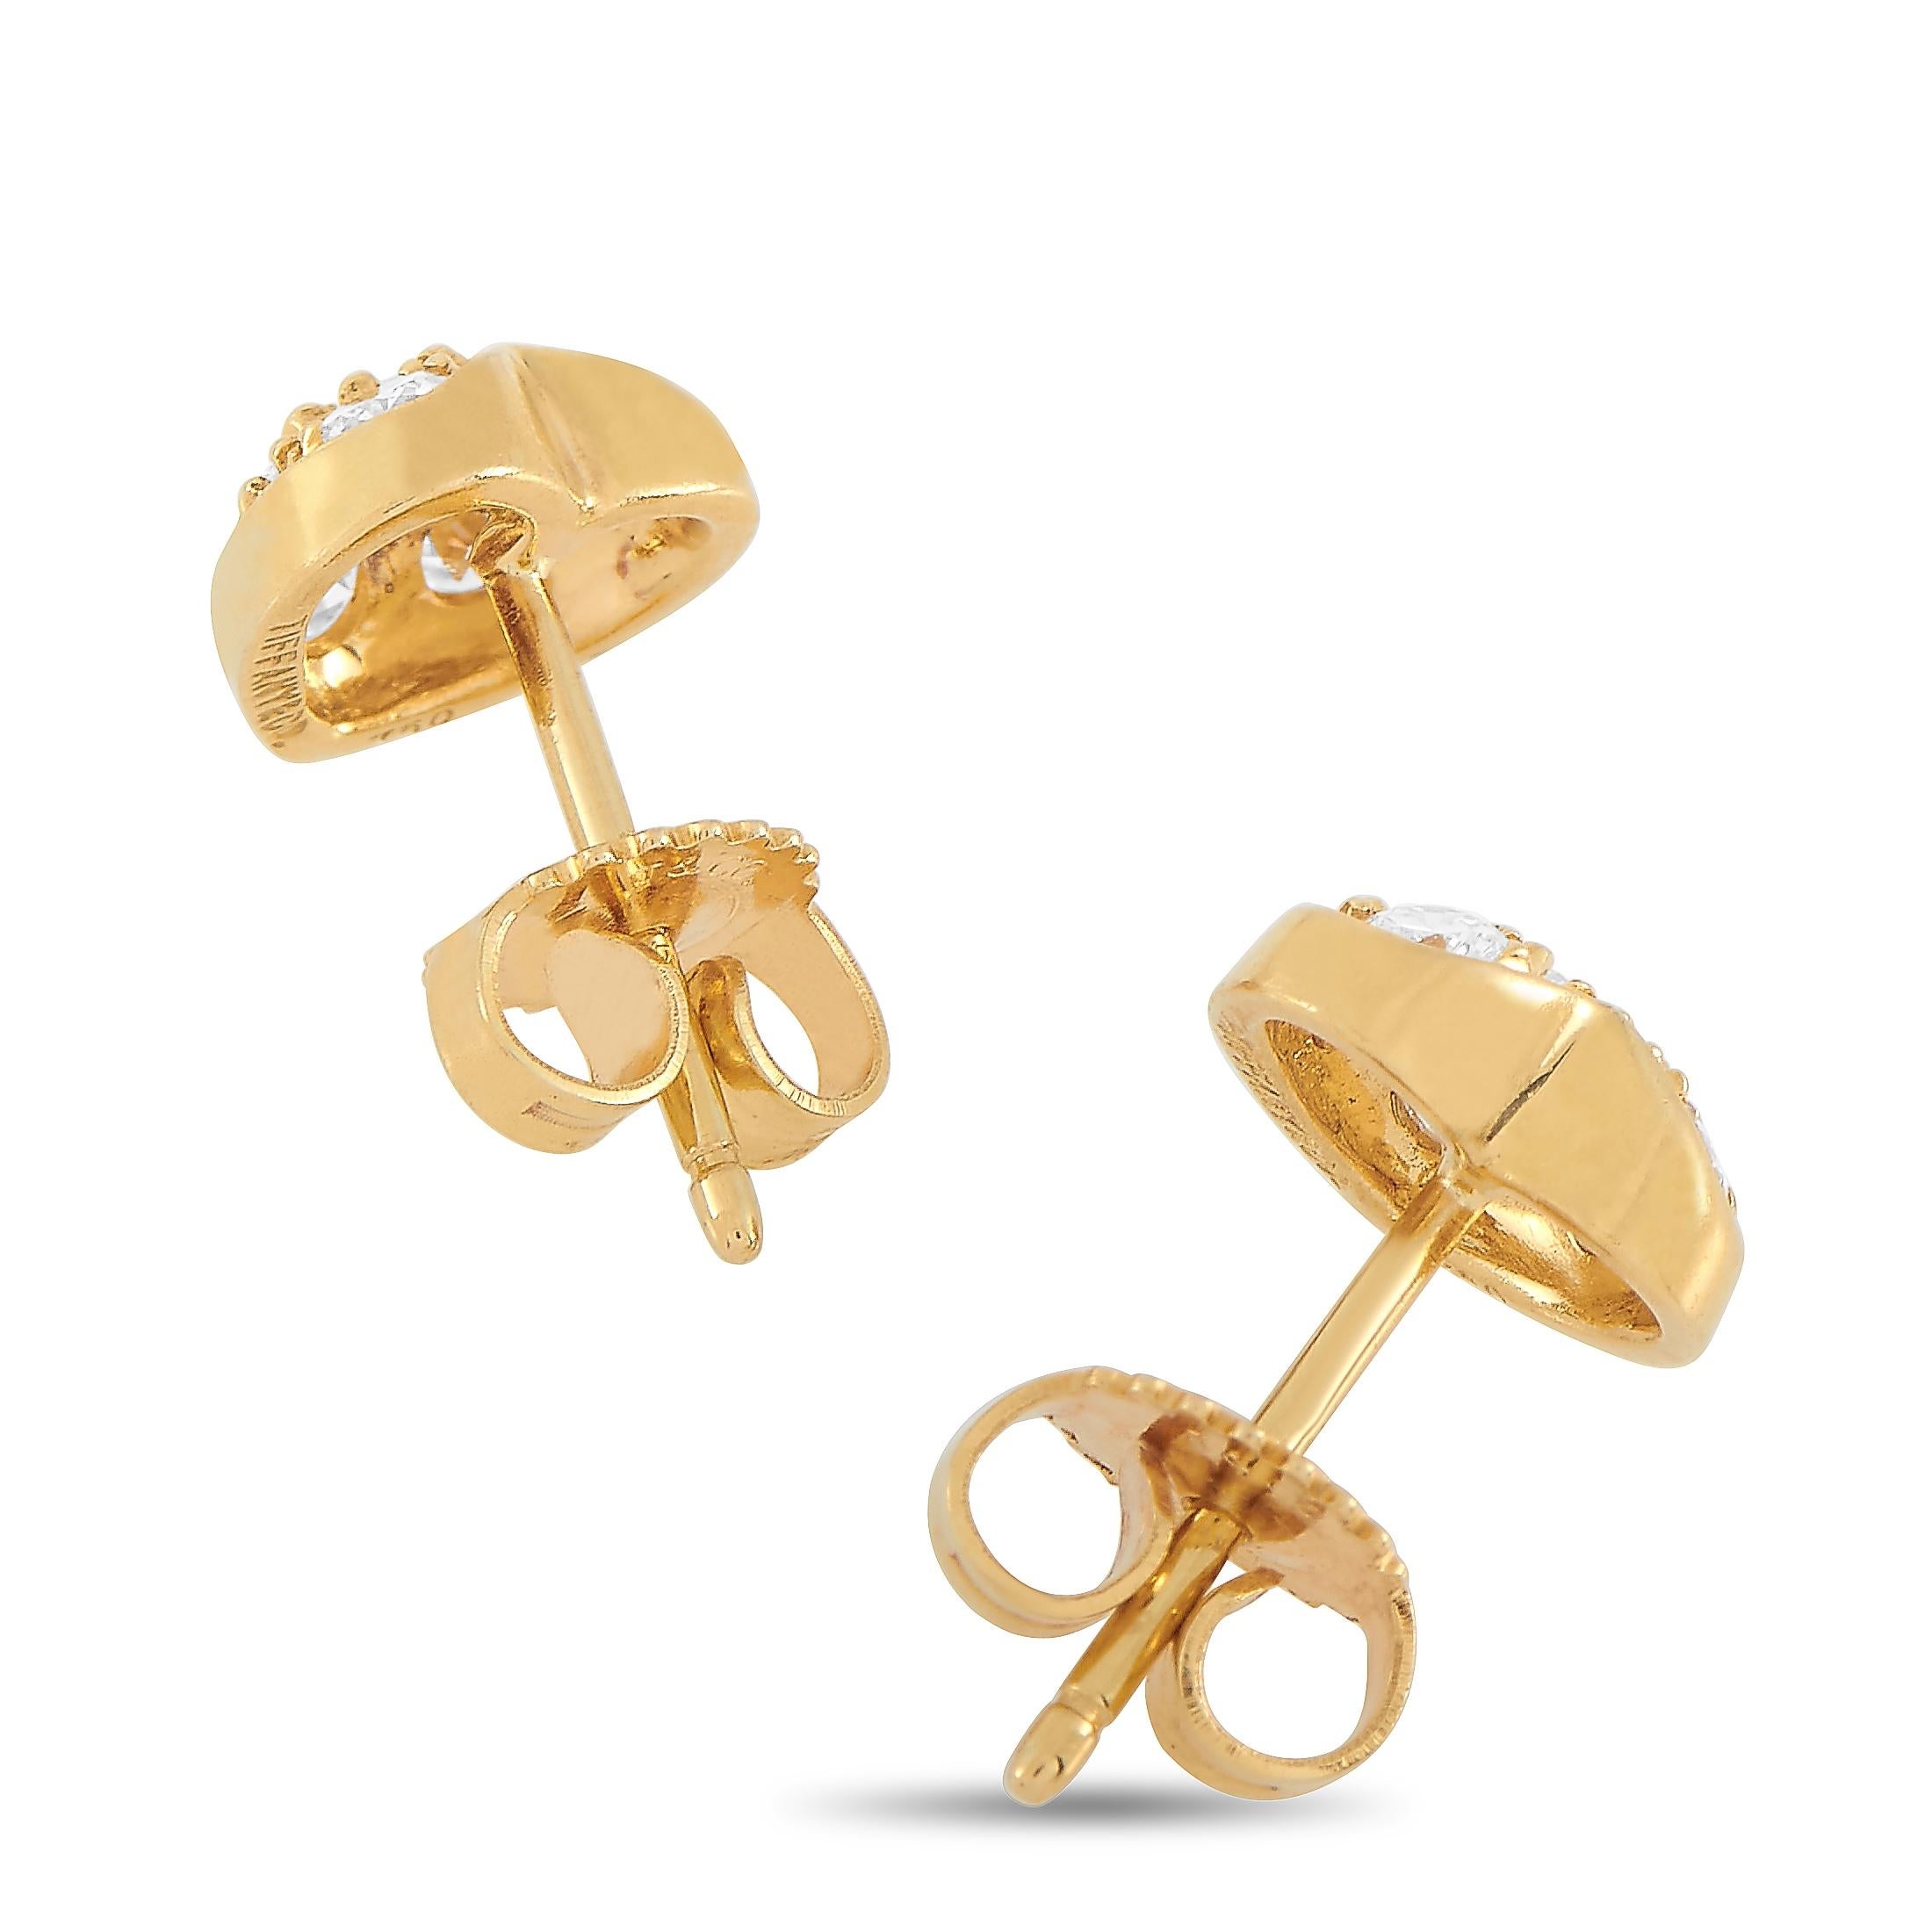 These Tiffany & Co. heart earrings are made of 18K yellow gold and embellished with diamonds that amount to 0.35 carats. The earrings measure 0.37” in length and 0.37” in width and each of the two weighs 1.2 grams.
 
 The pair is offered in estate